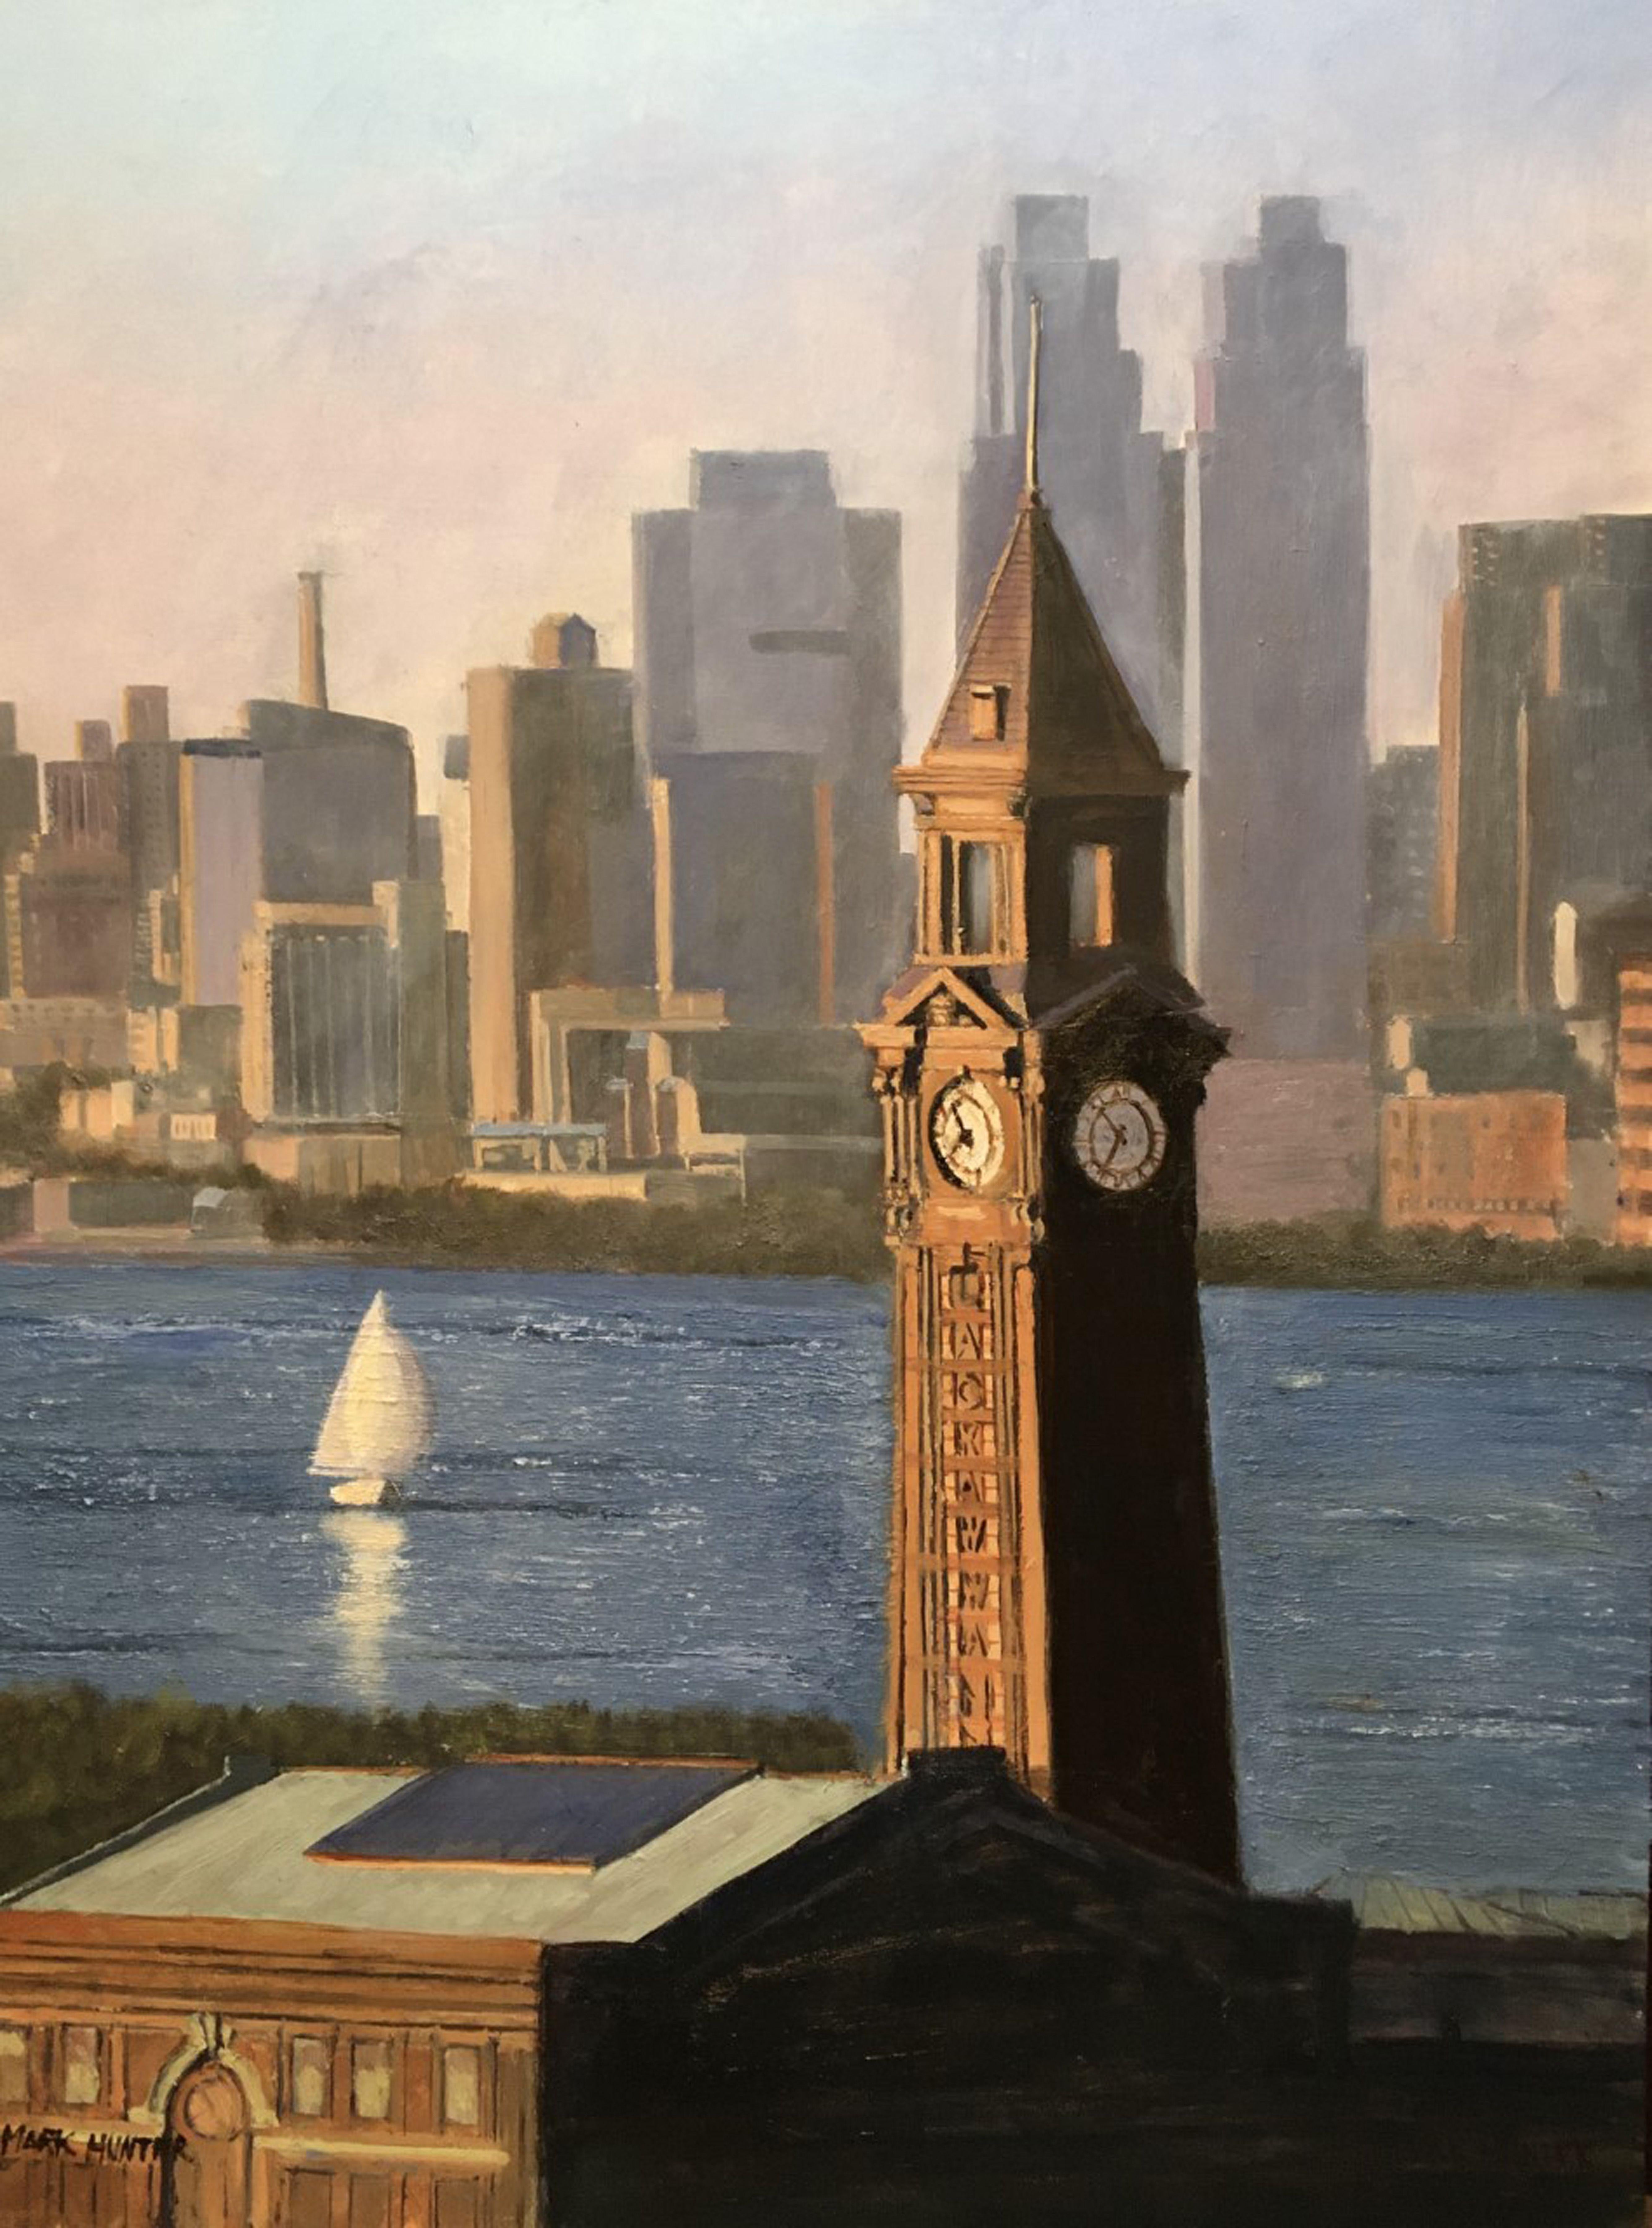 Clock Tower was inspired by the view of the Hoboken Lackawanna train station clock tower and the Manhattan Skyline from a Jersey City high rise building.    I want the viewer to gaze past the Clock Tower and the Hudson River to the Manhattan